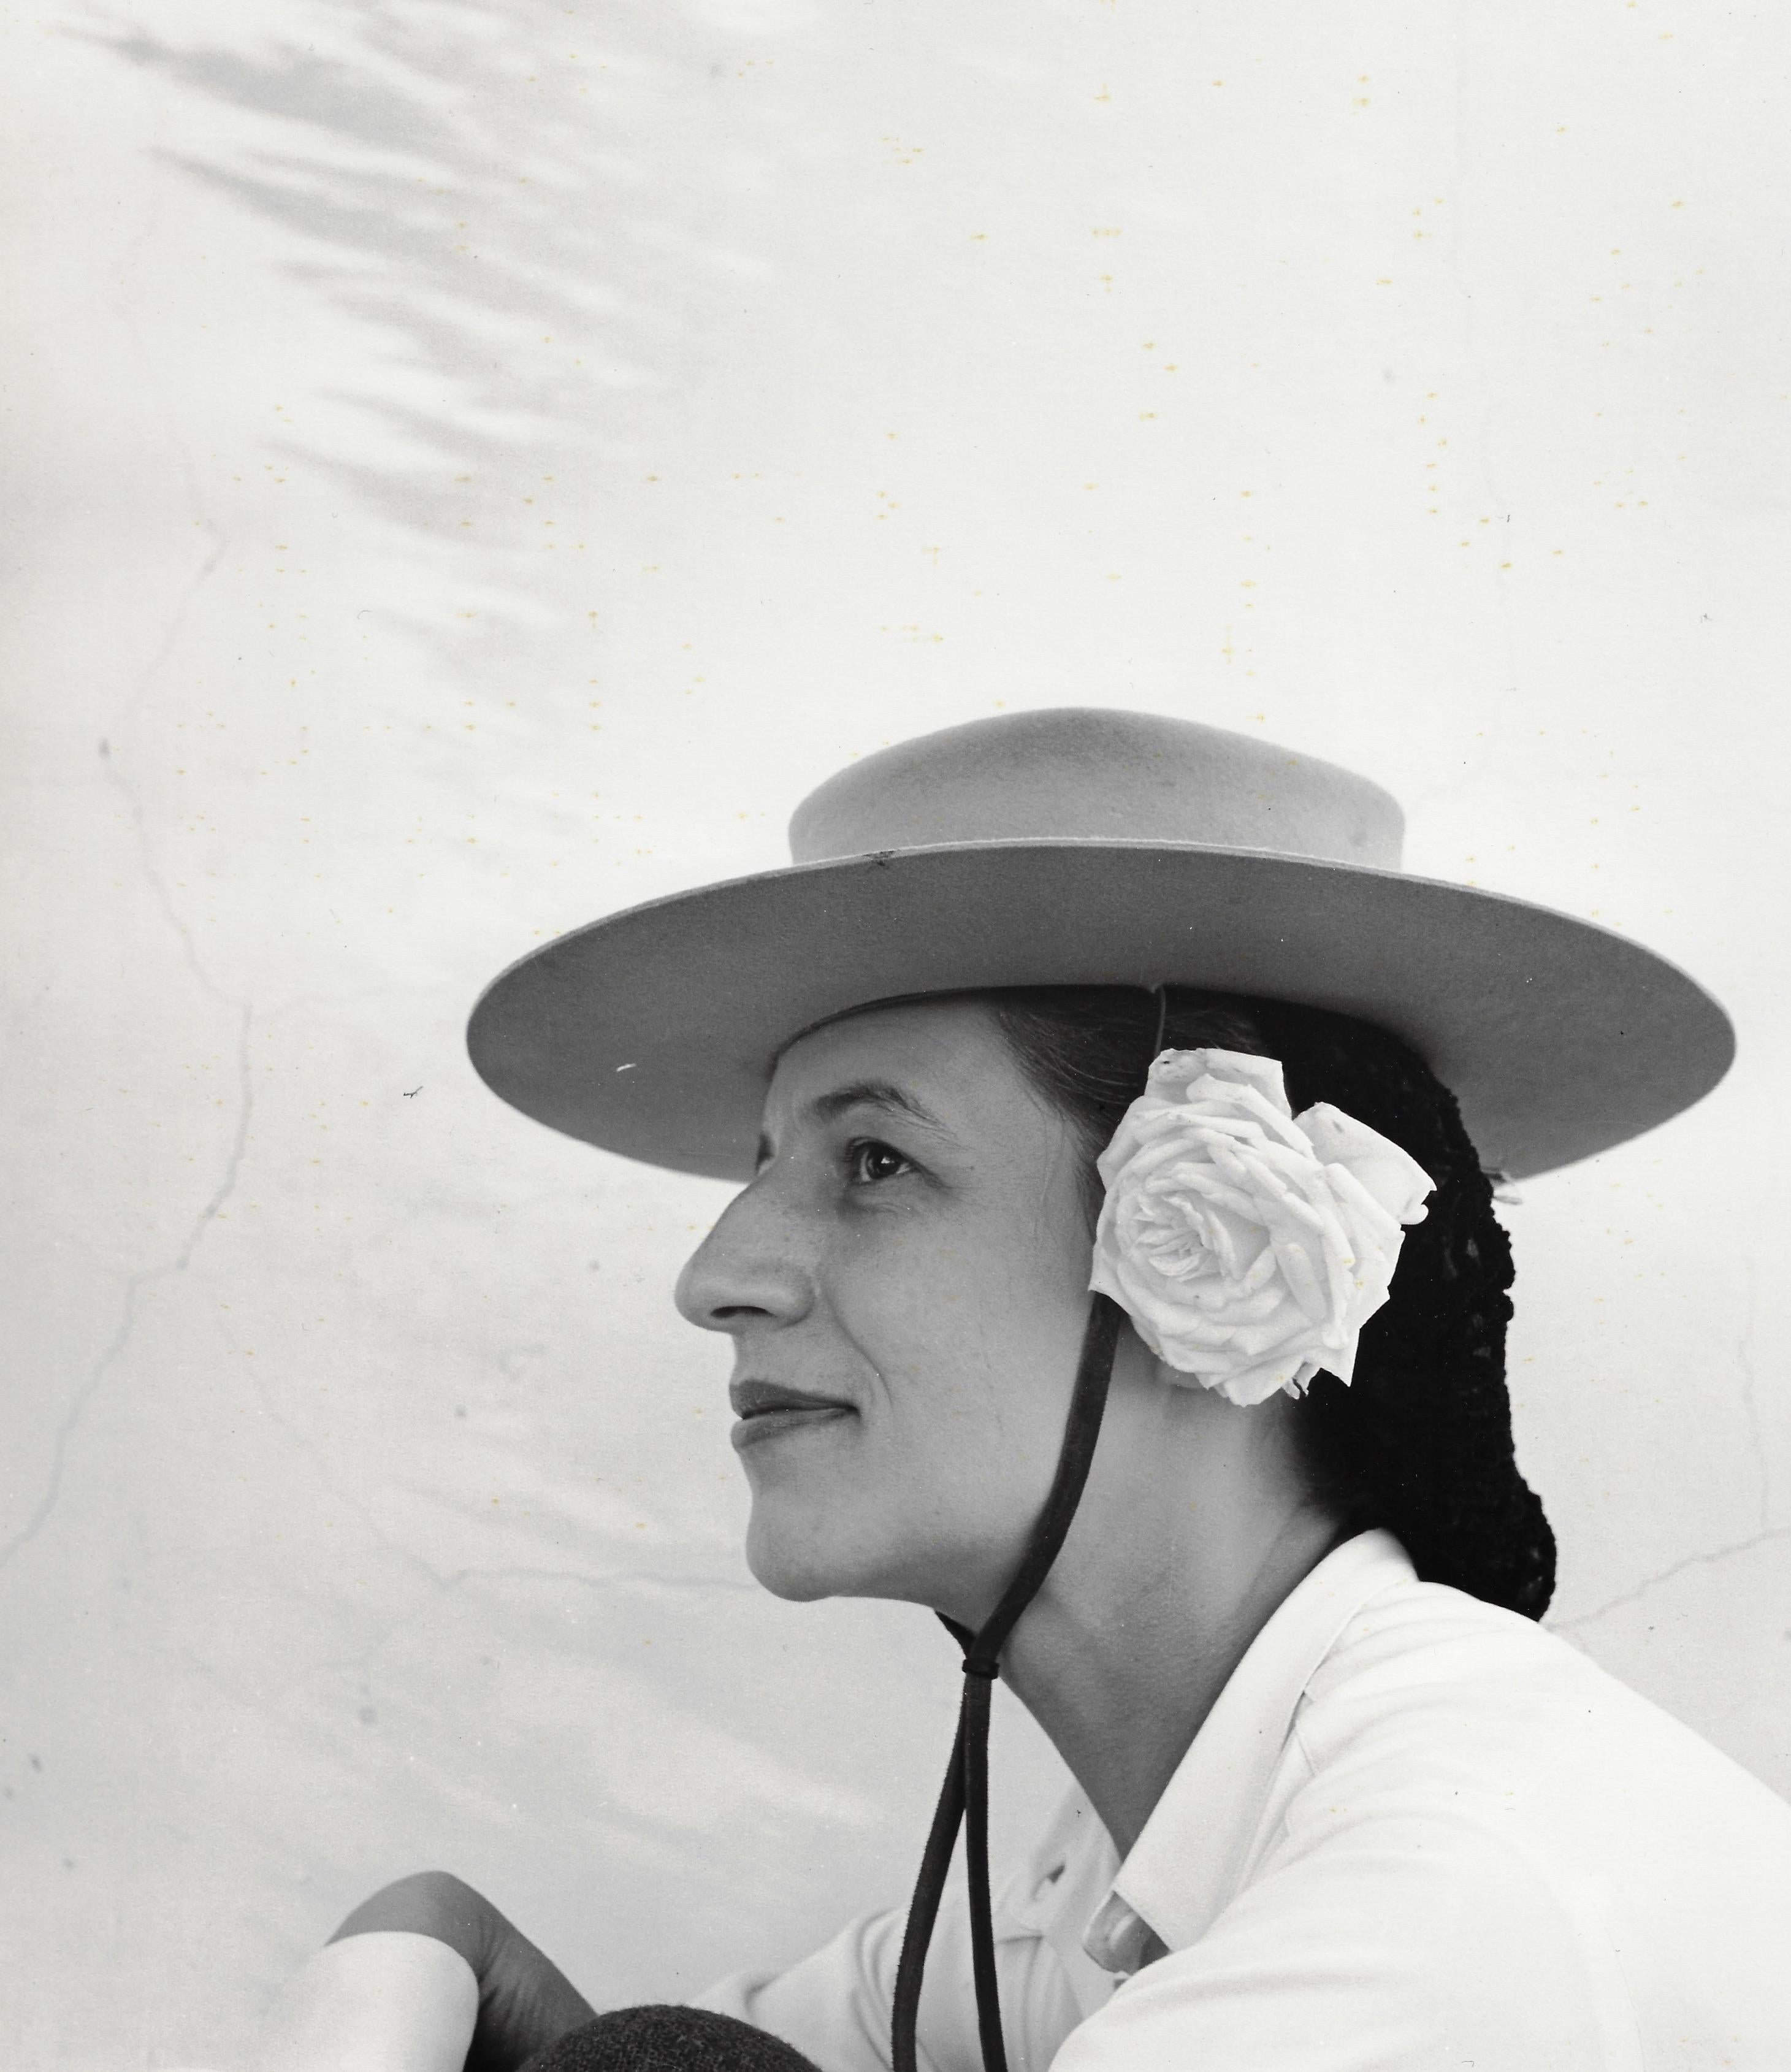 Louise Dahl-Wolfe Black and White Photograph - Diana Vreeland with Hat and Rose